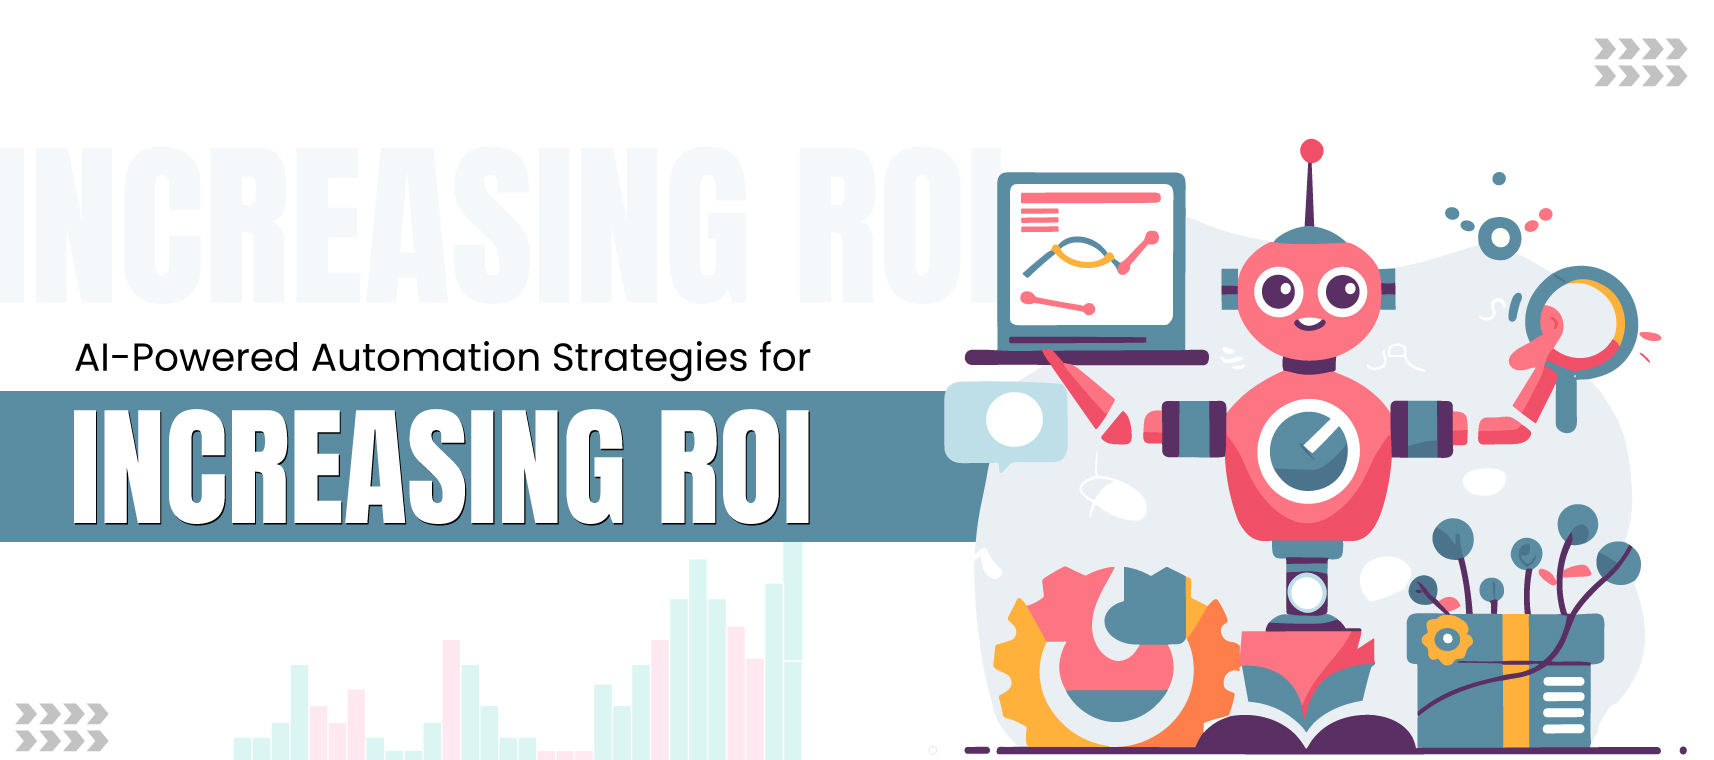 AI-Powered Automation Strategies for Increasing ROI